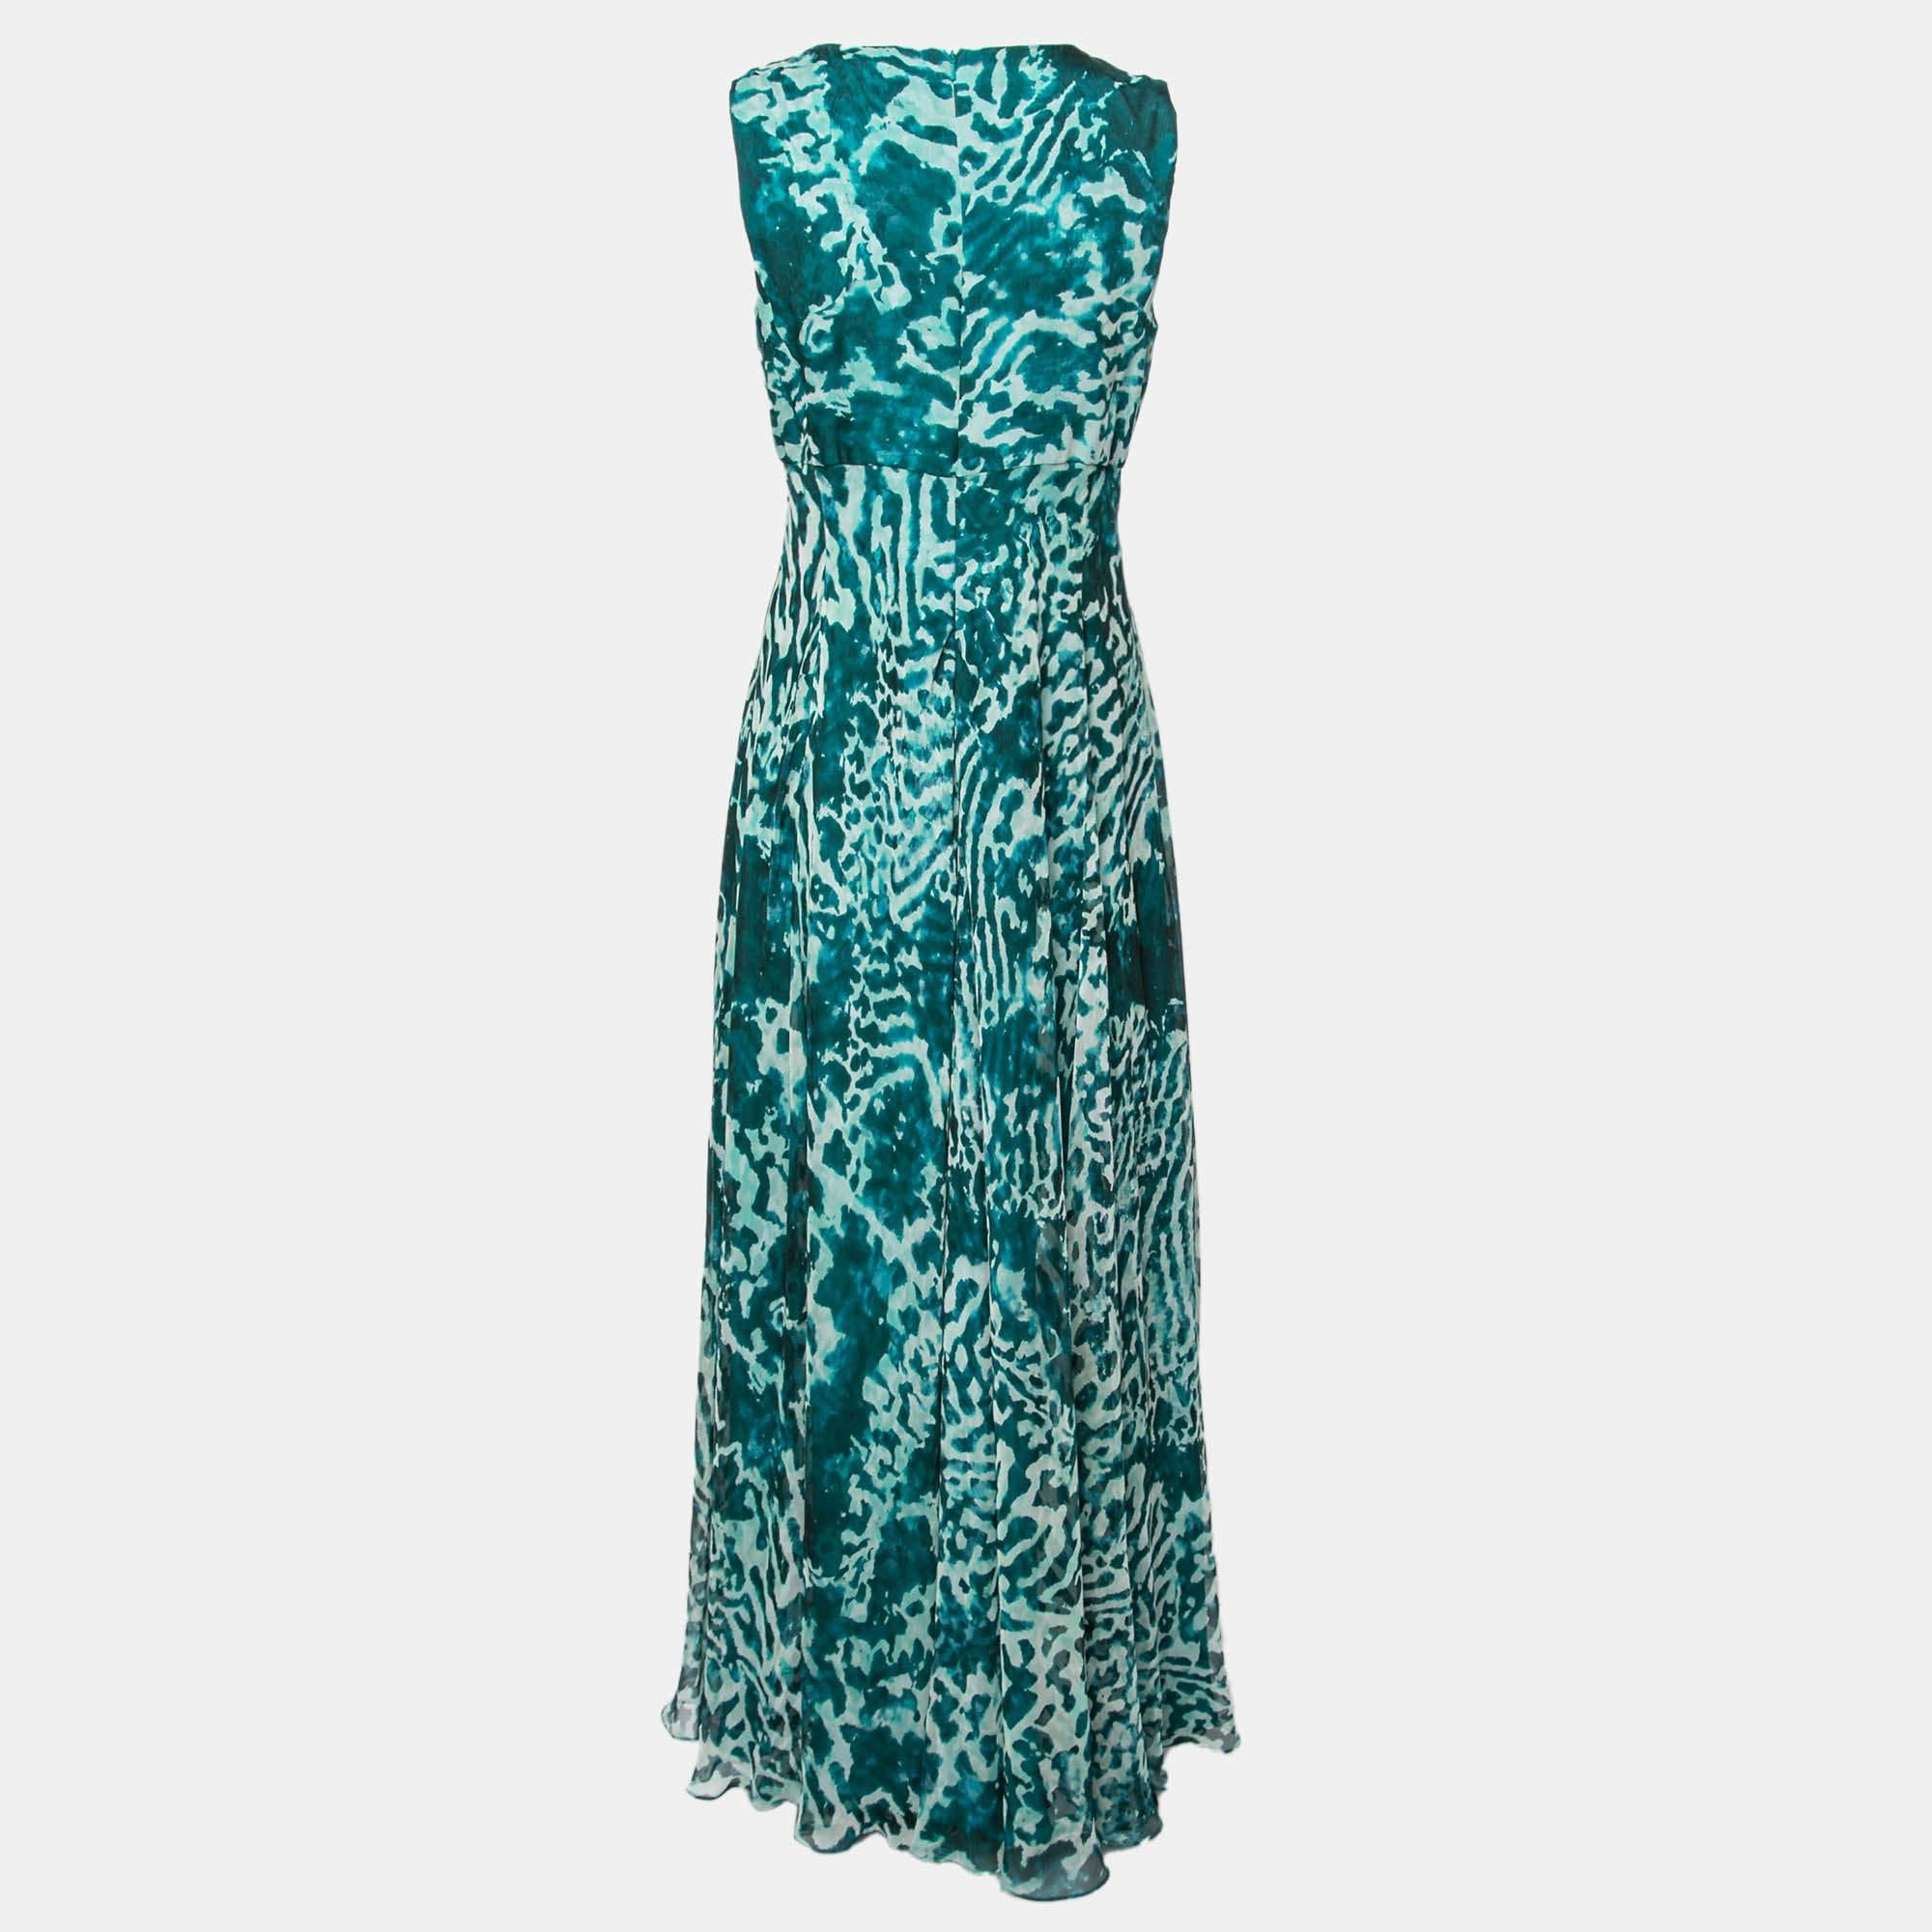 A simple yet elegant dress like this emerald green one by Max Mara is just what you need for special summer occasions. Tailored from printed silk, it features a flowy silhouette that is accentuated with a lovely fitted waist. Pair the maxi dress